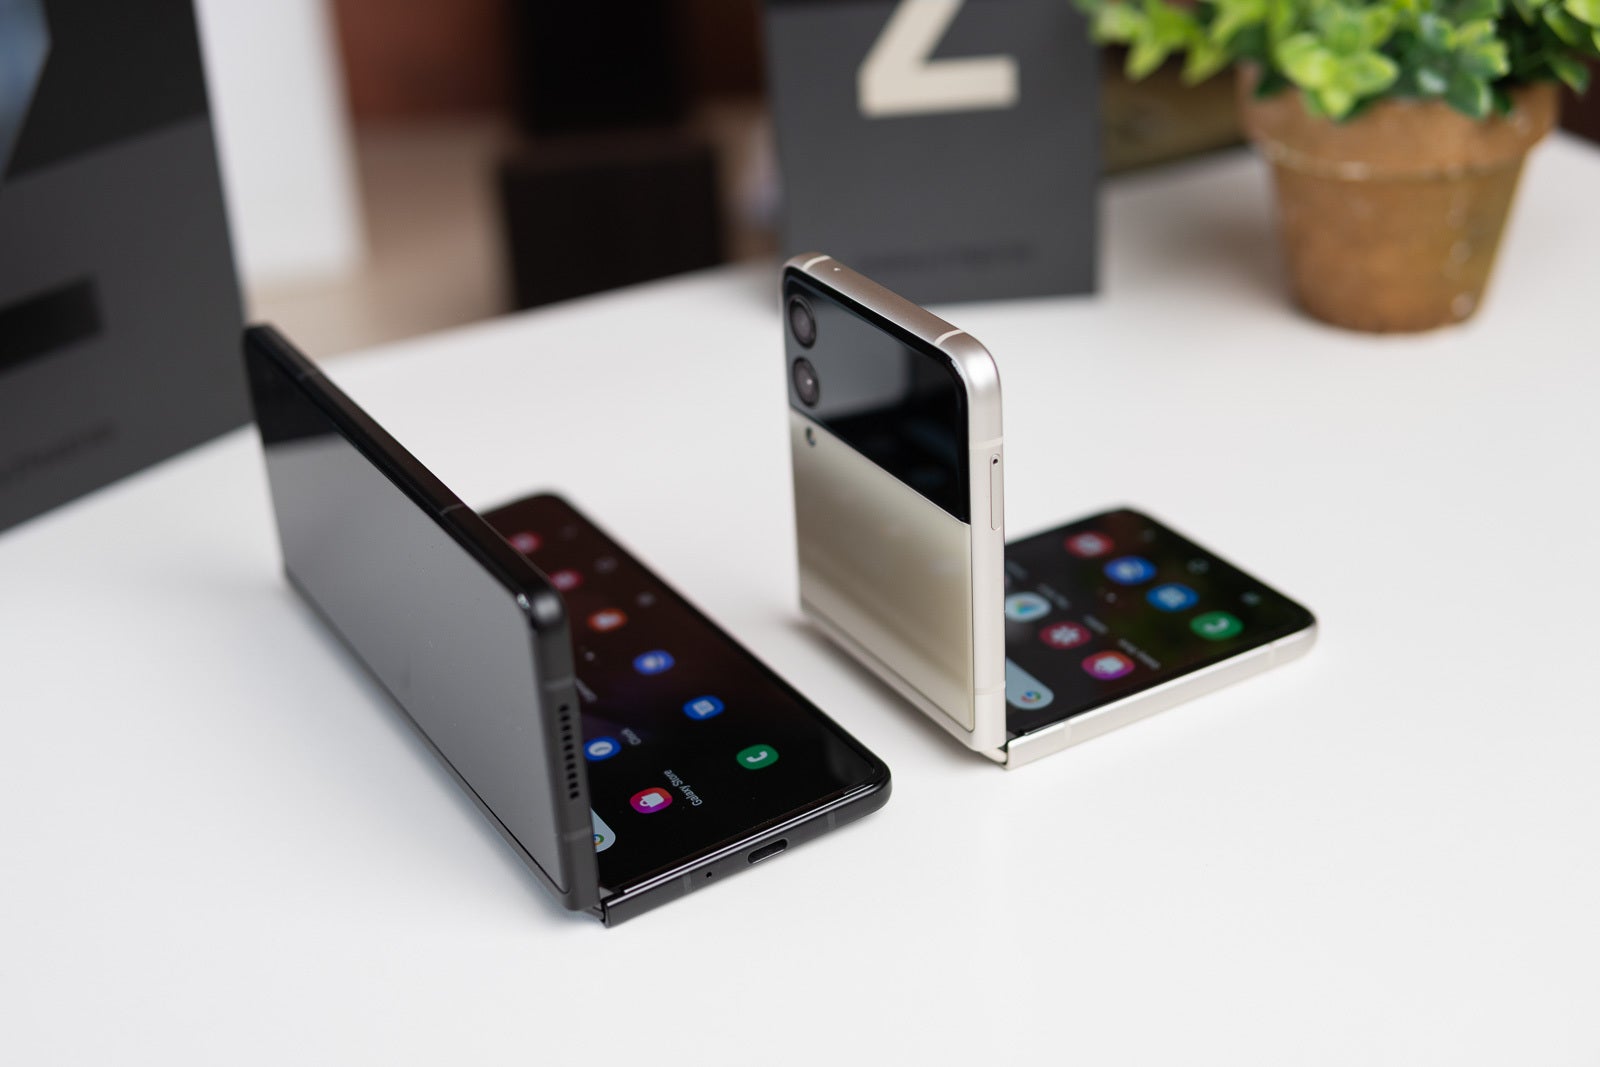 The Galaxy Z Fold 3 (left) and Z Flip 3 (right) - While indecisive Google is playing catch-up with Apple, Samsung plows ahead (Pixel Fold, Pixel Watch, Pixel 6)